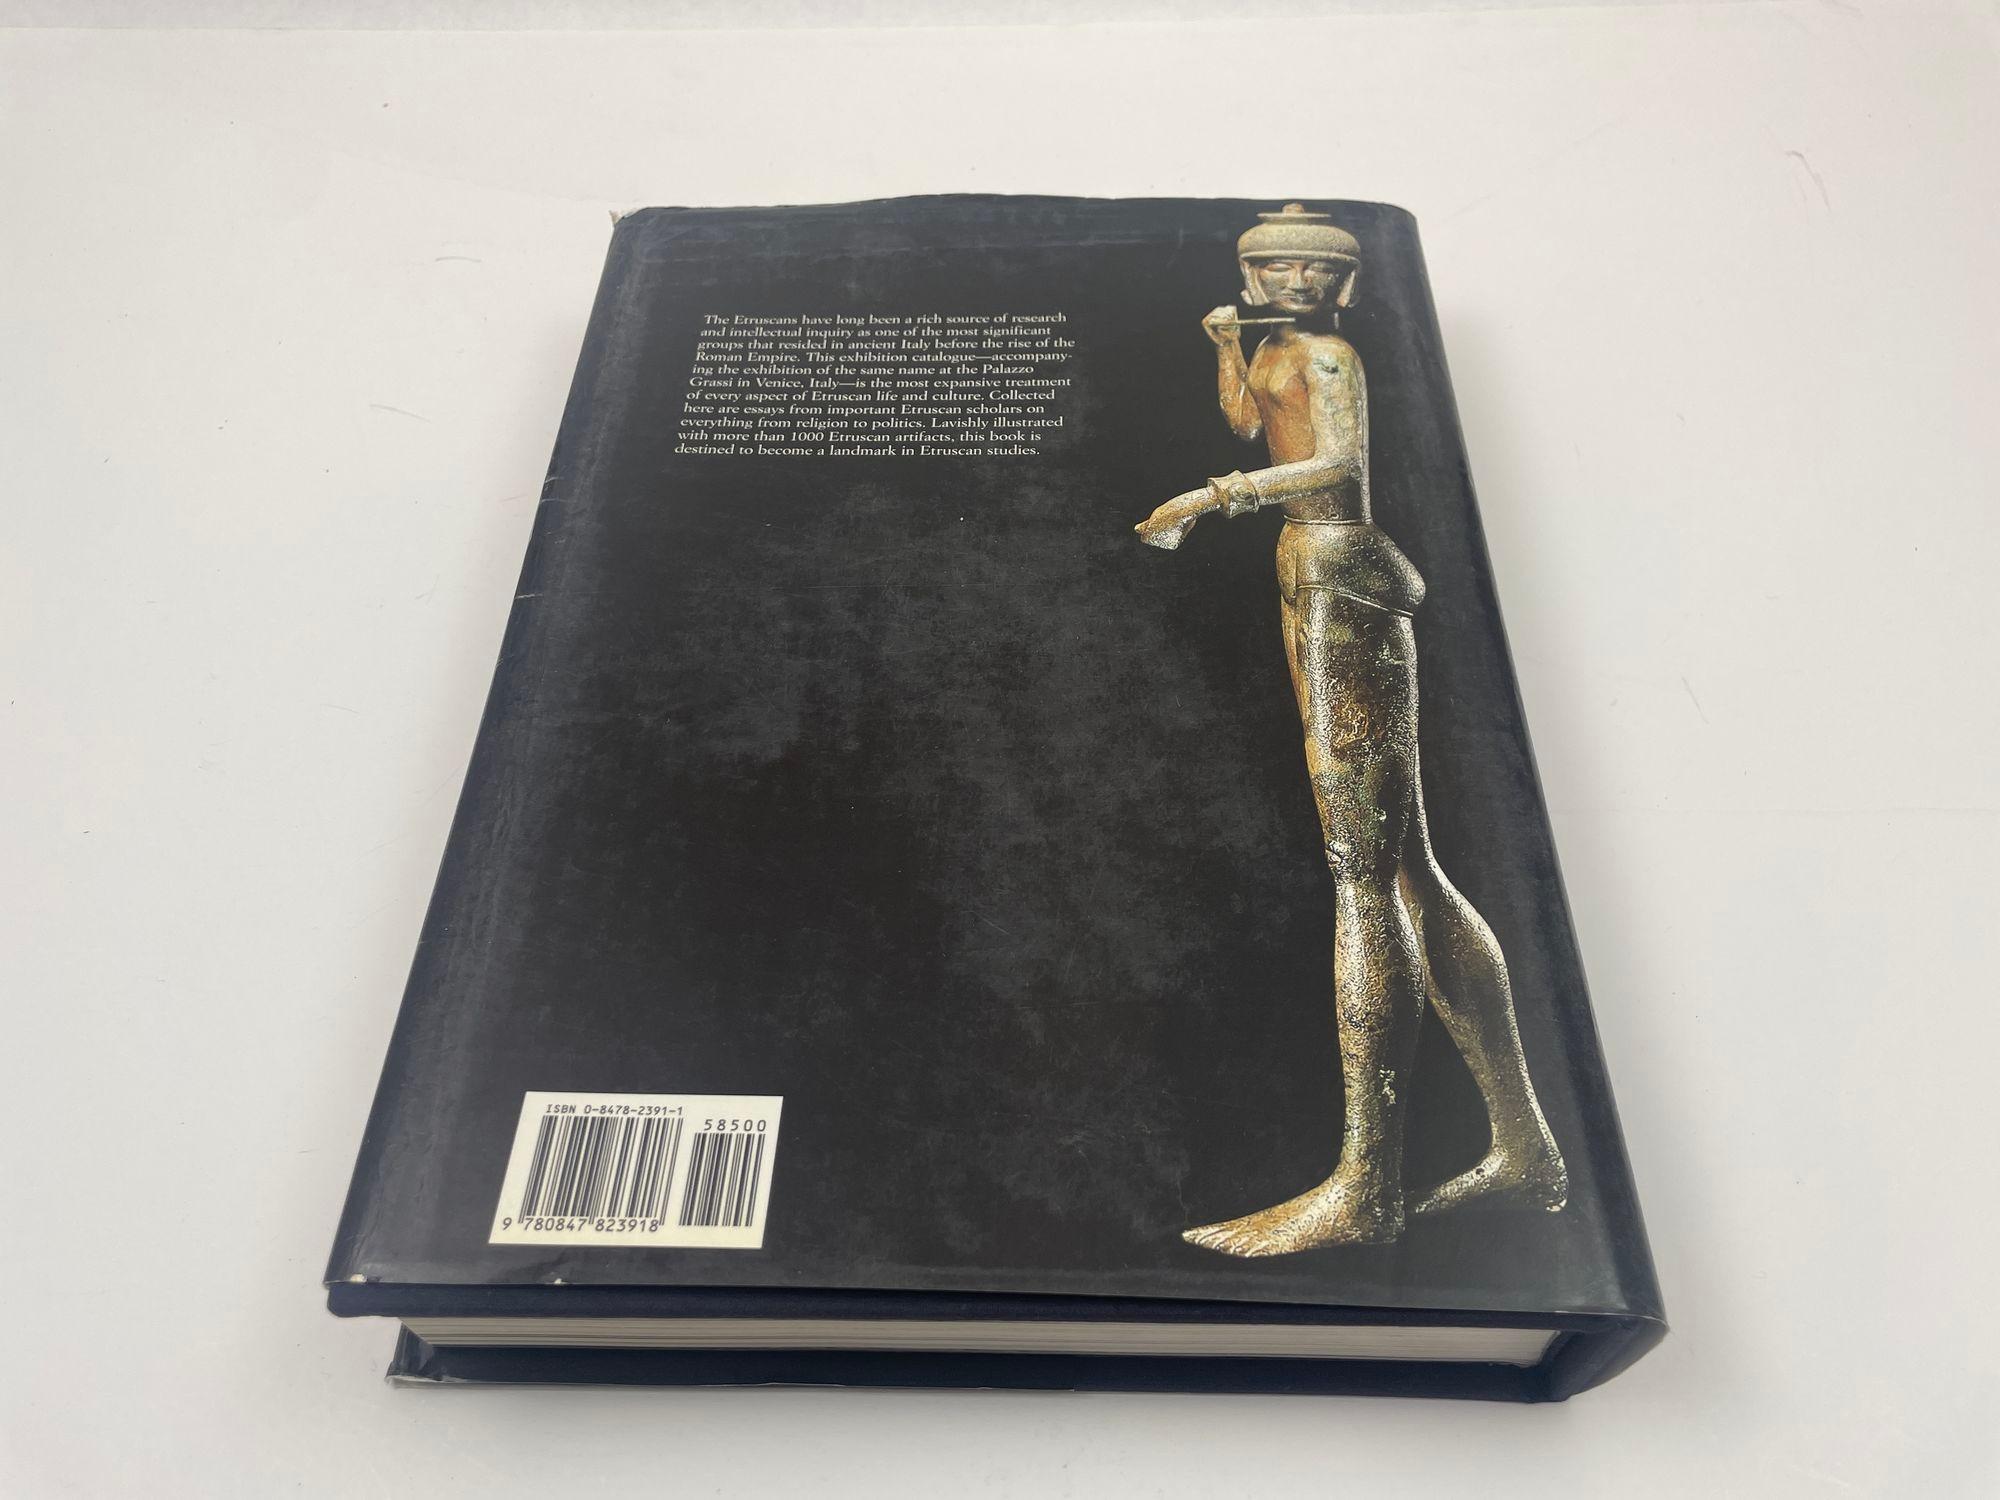 Italian The Etruscans Hardcover Book by Mario Torelli 1st Ed. 2001 Rizzoli For Sale